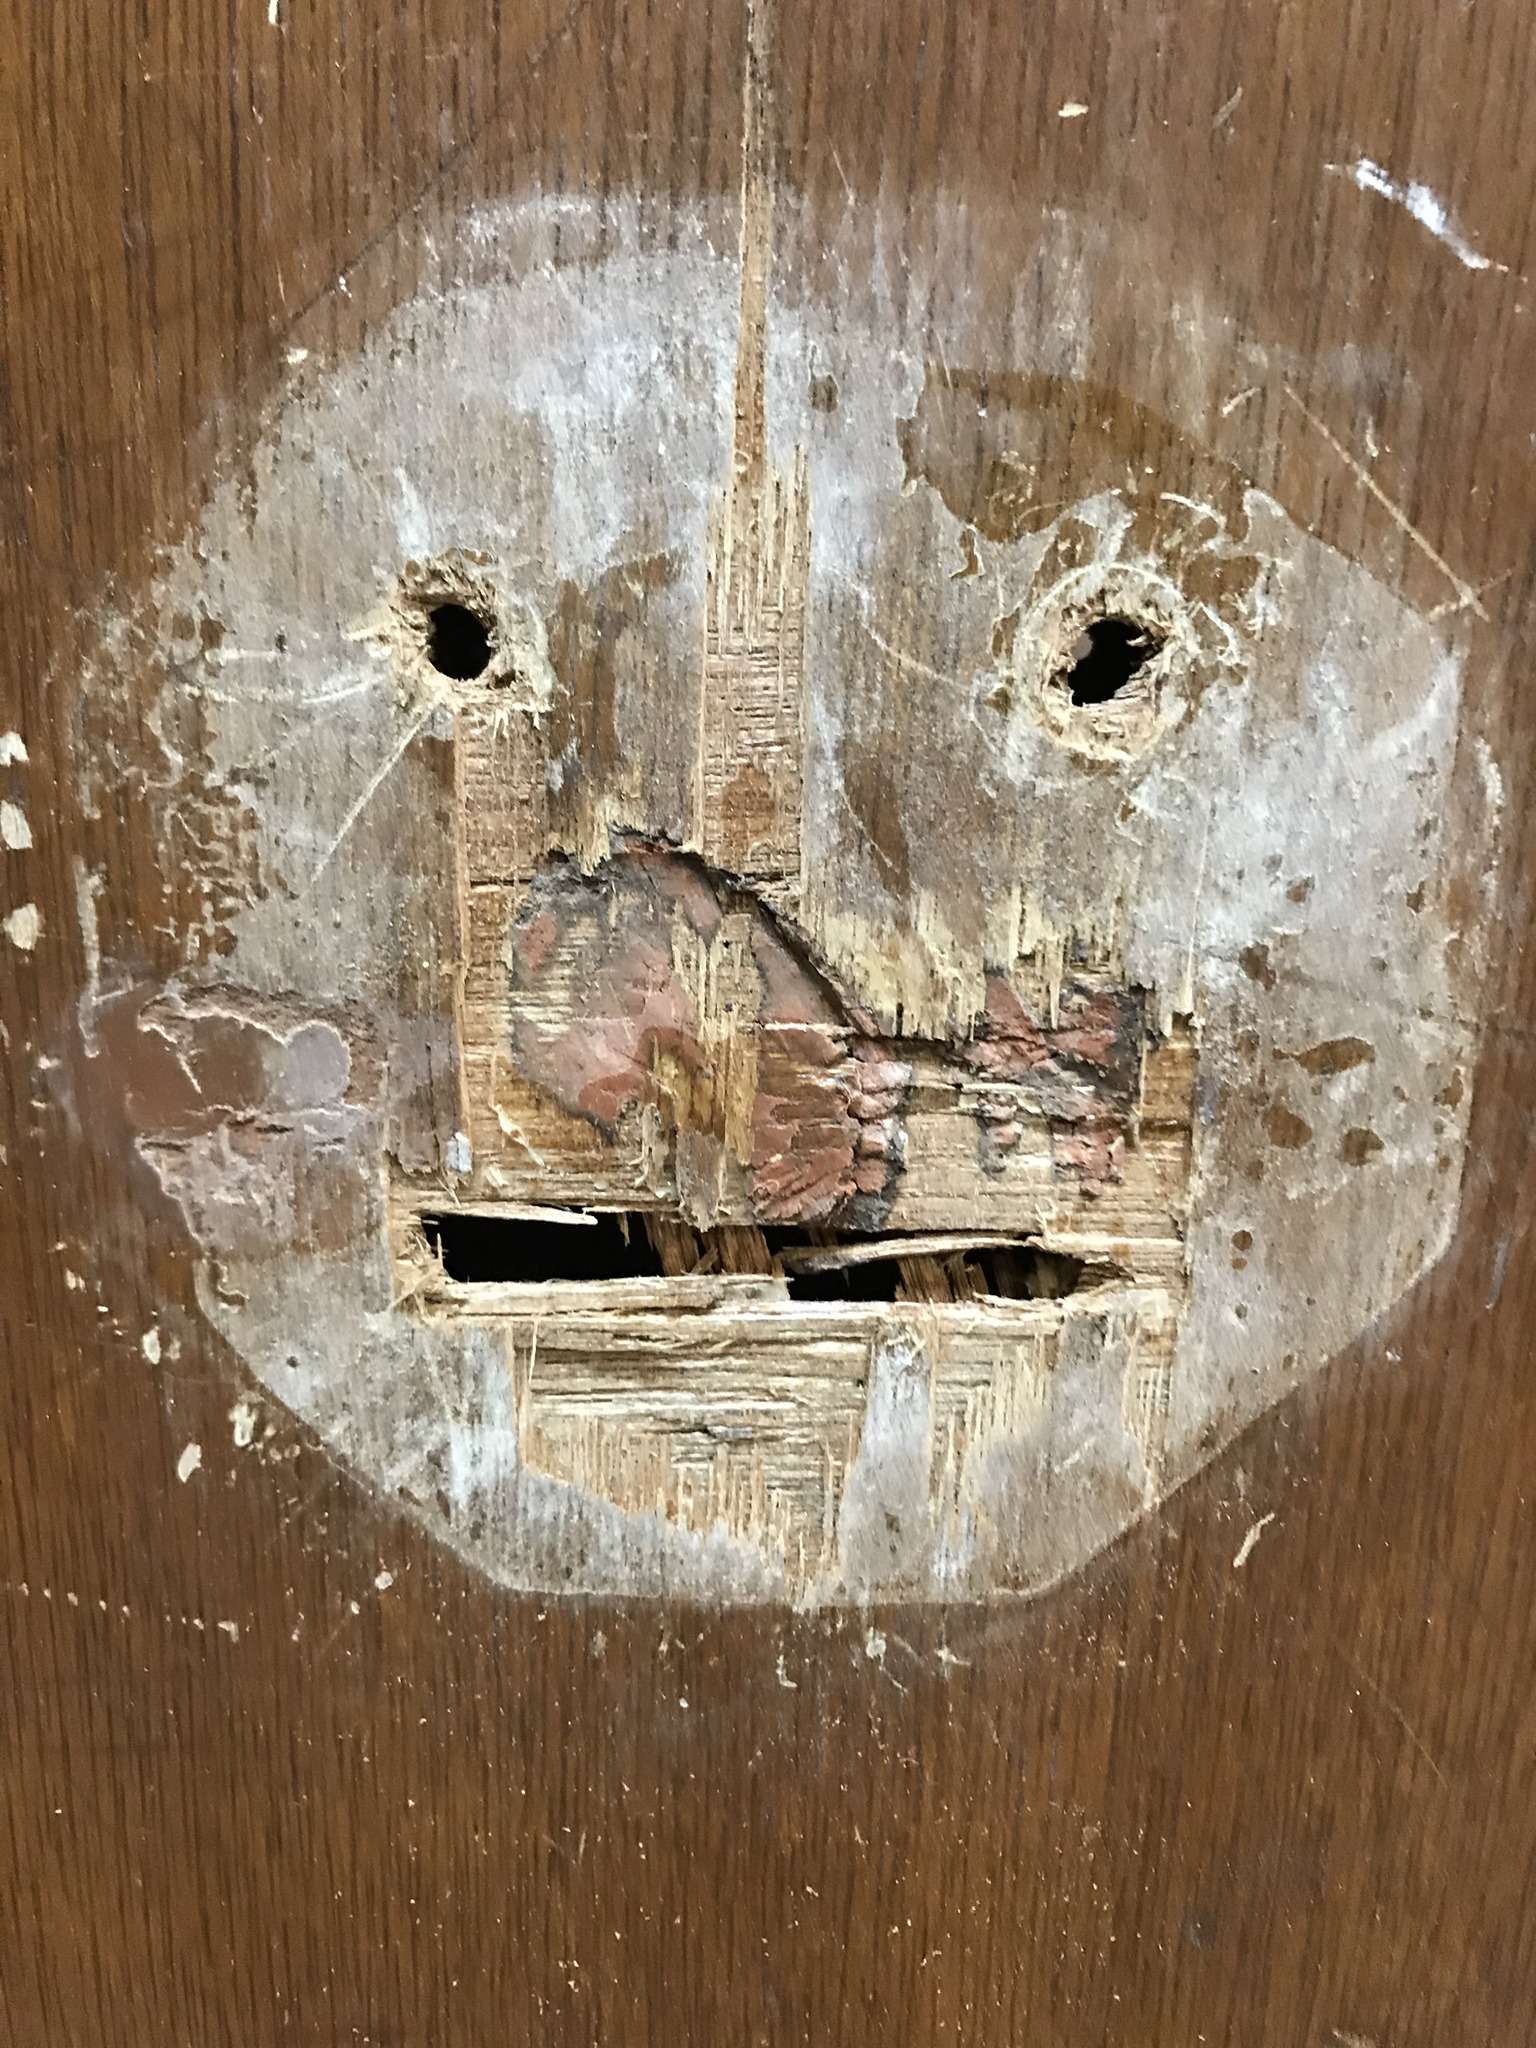 Damaged Door - Fit for the King